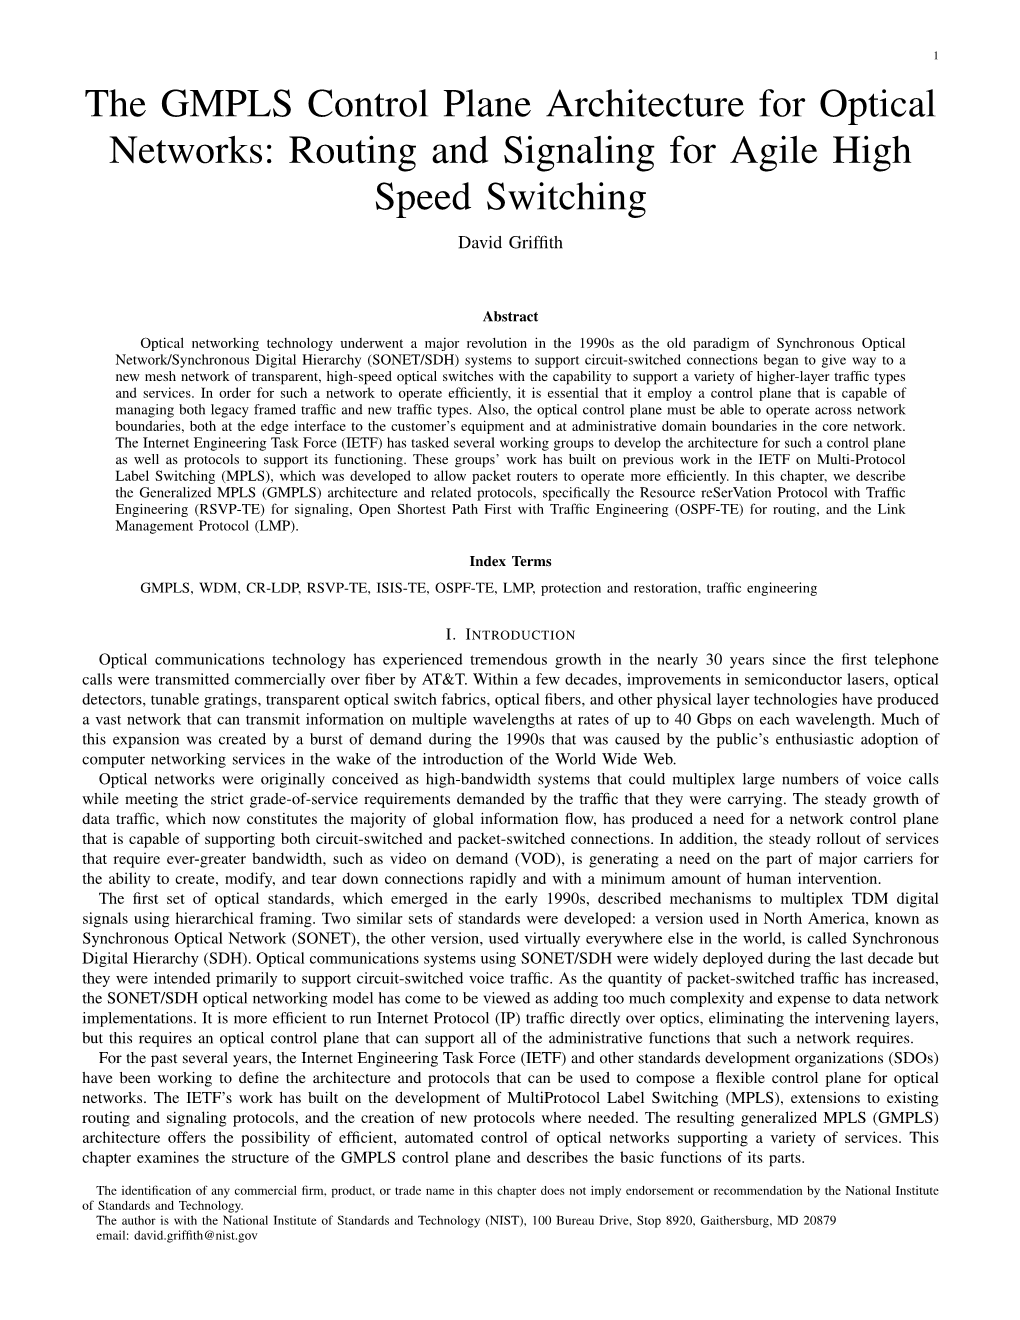 The GMPLS Control Plane Architecture for Optical Networks: Routing and Signaling for Agile High Speed Switching David Grifﬁth